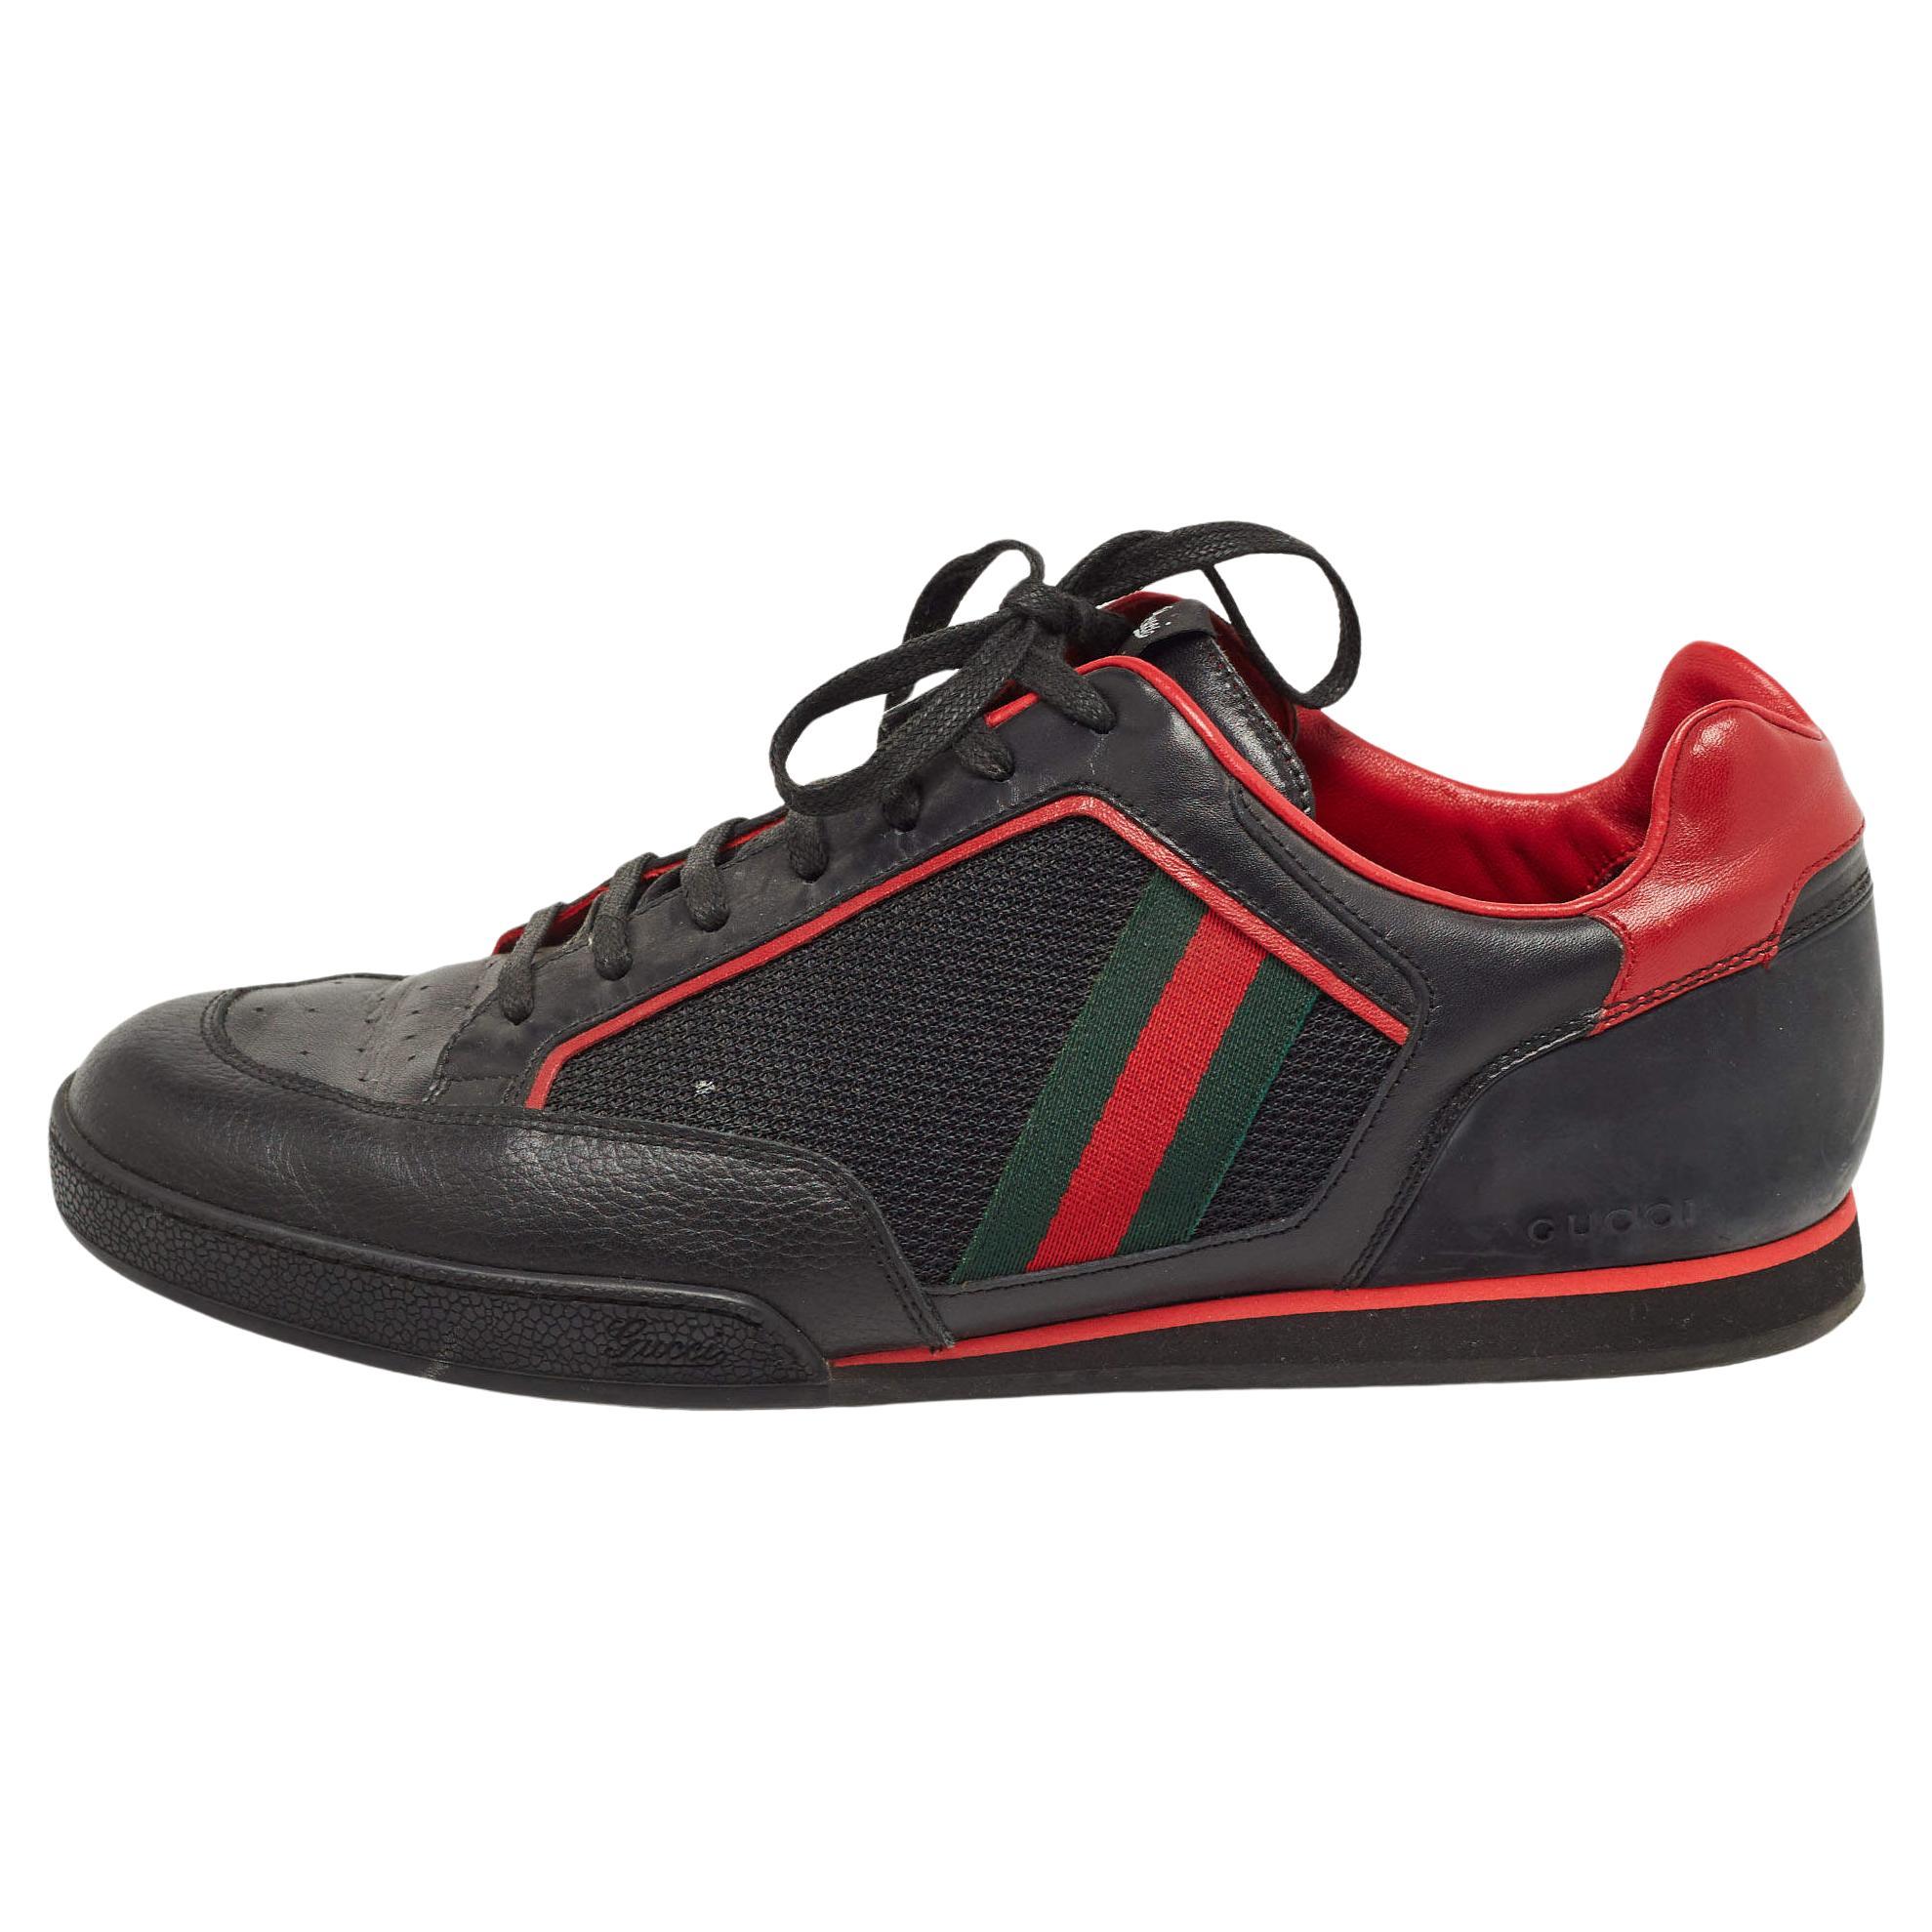 Gucci Black/Red Leather and Mesh Vintage Tennis Sneakers Size 43.5 For Sale